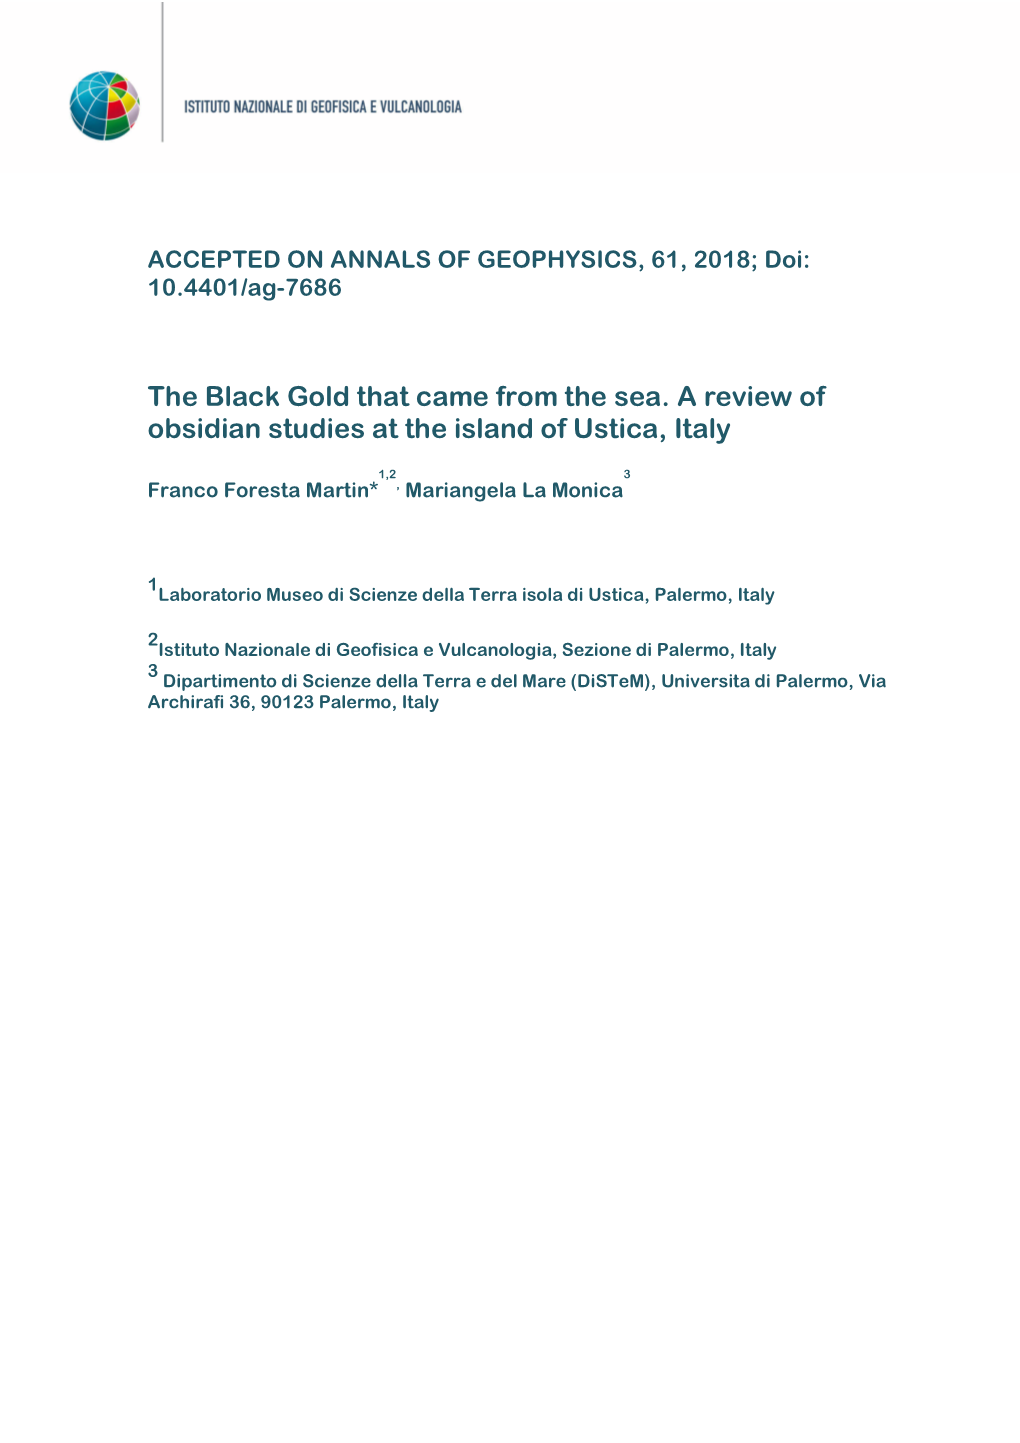 The Black Gold That Came from the Sea. a Review of Obsidian Studies at the Island of Ustica, Italy